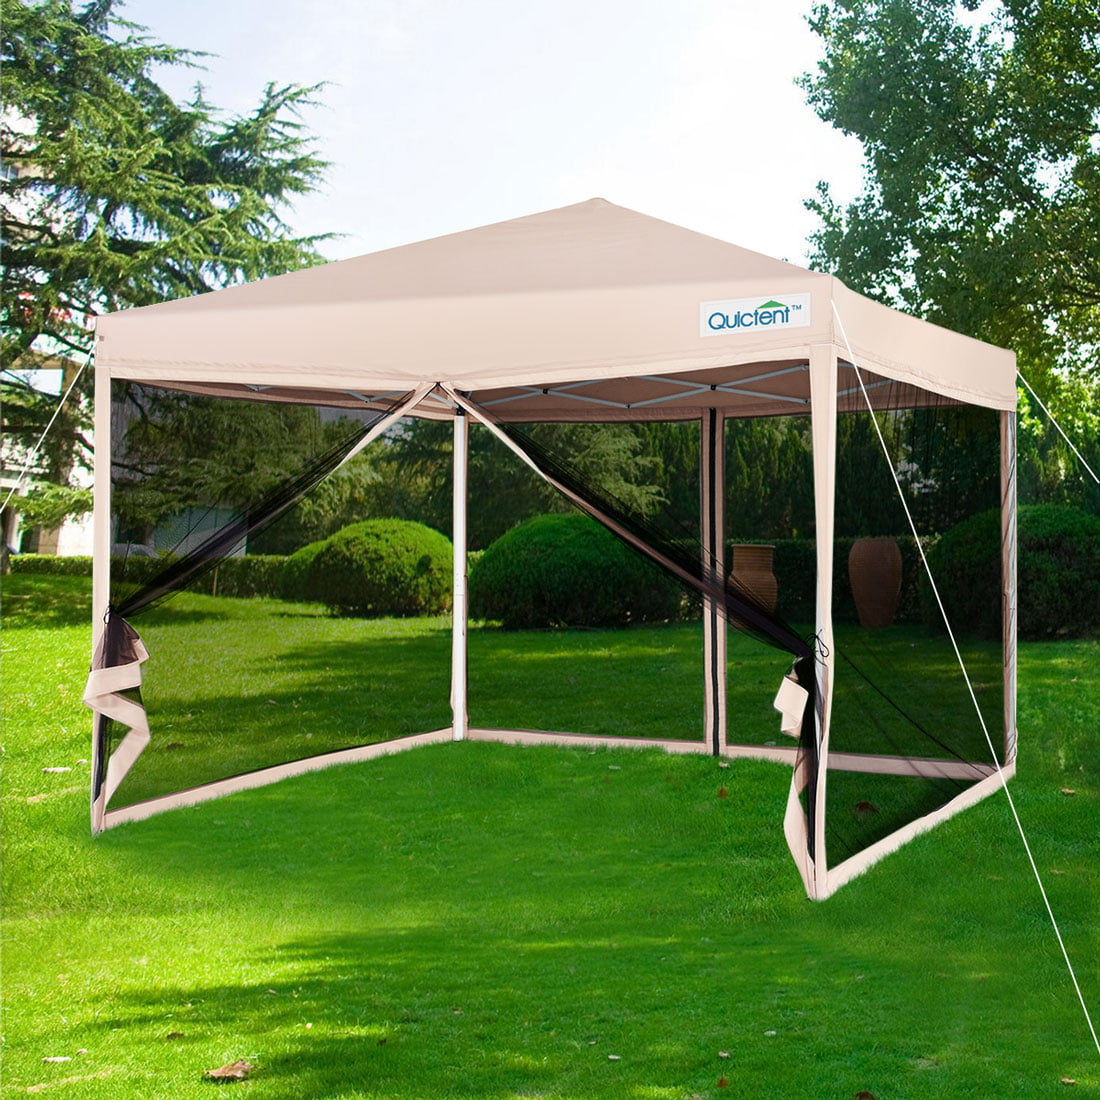 Cabin Style OutdoorCanopy Gazebo  11' x 11' with Netting and Adjustable Side